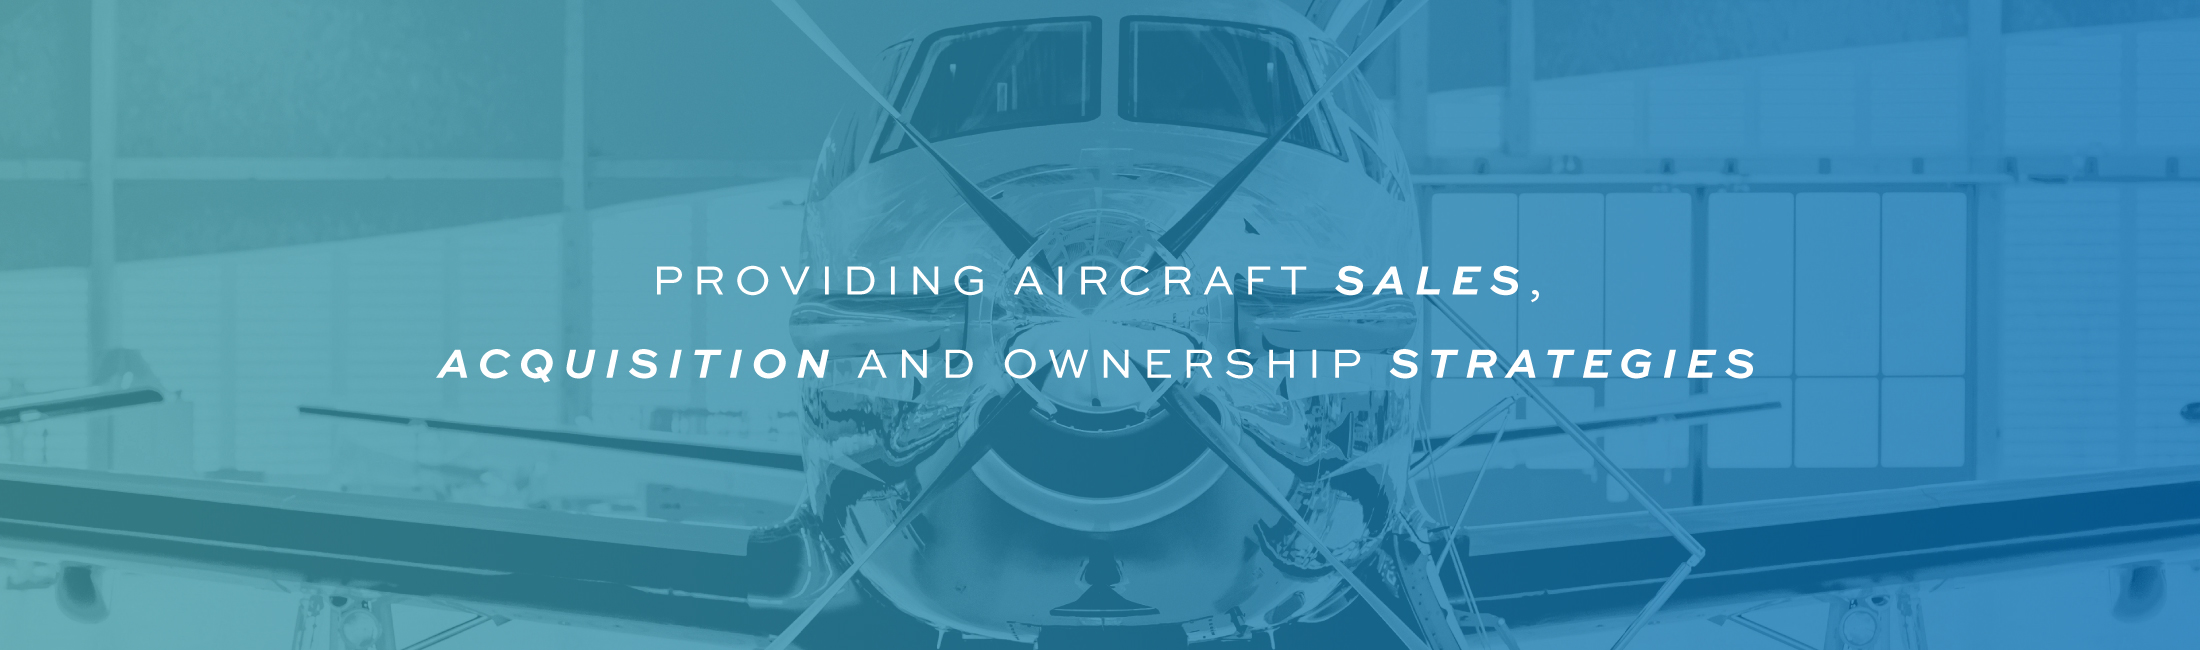 Aircraft Trade Group • Providing Aircraft Sales, Acquisition and Ownership Strategies